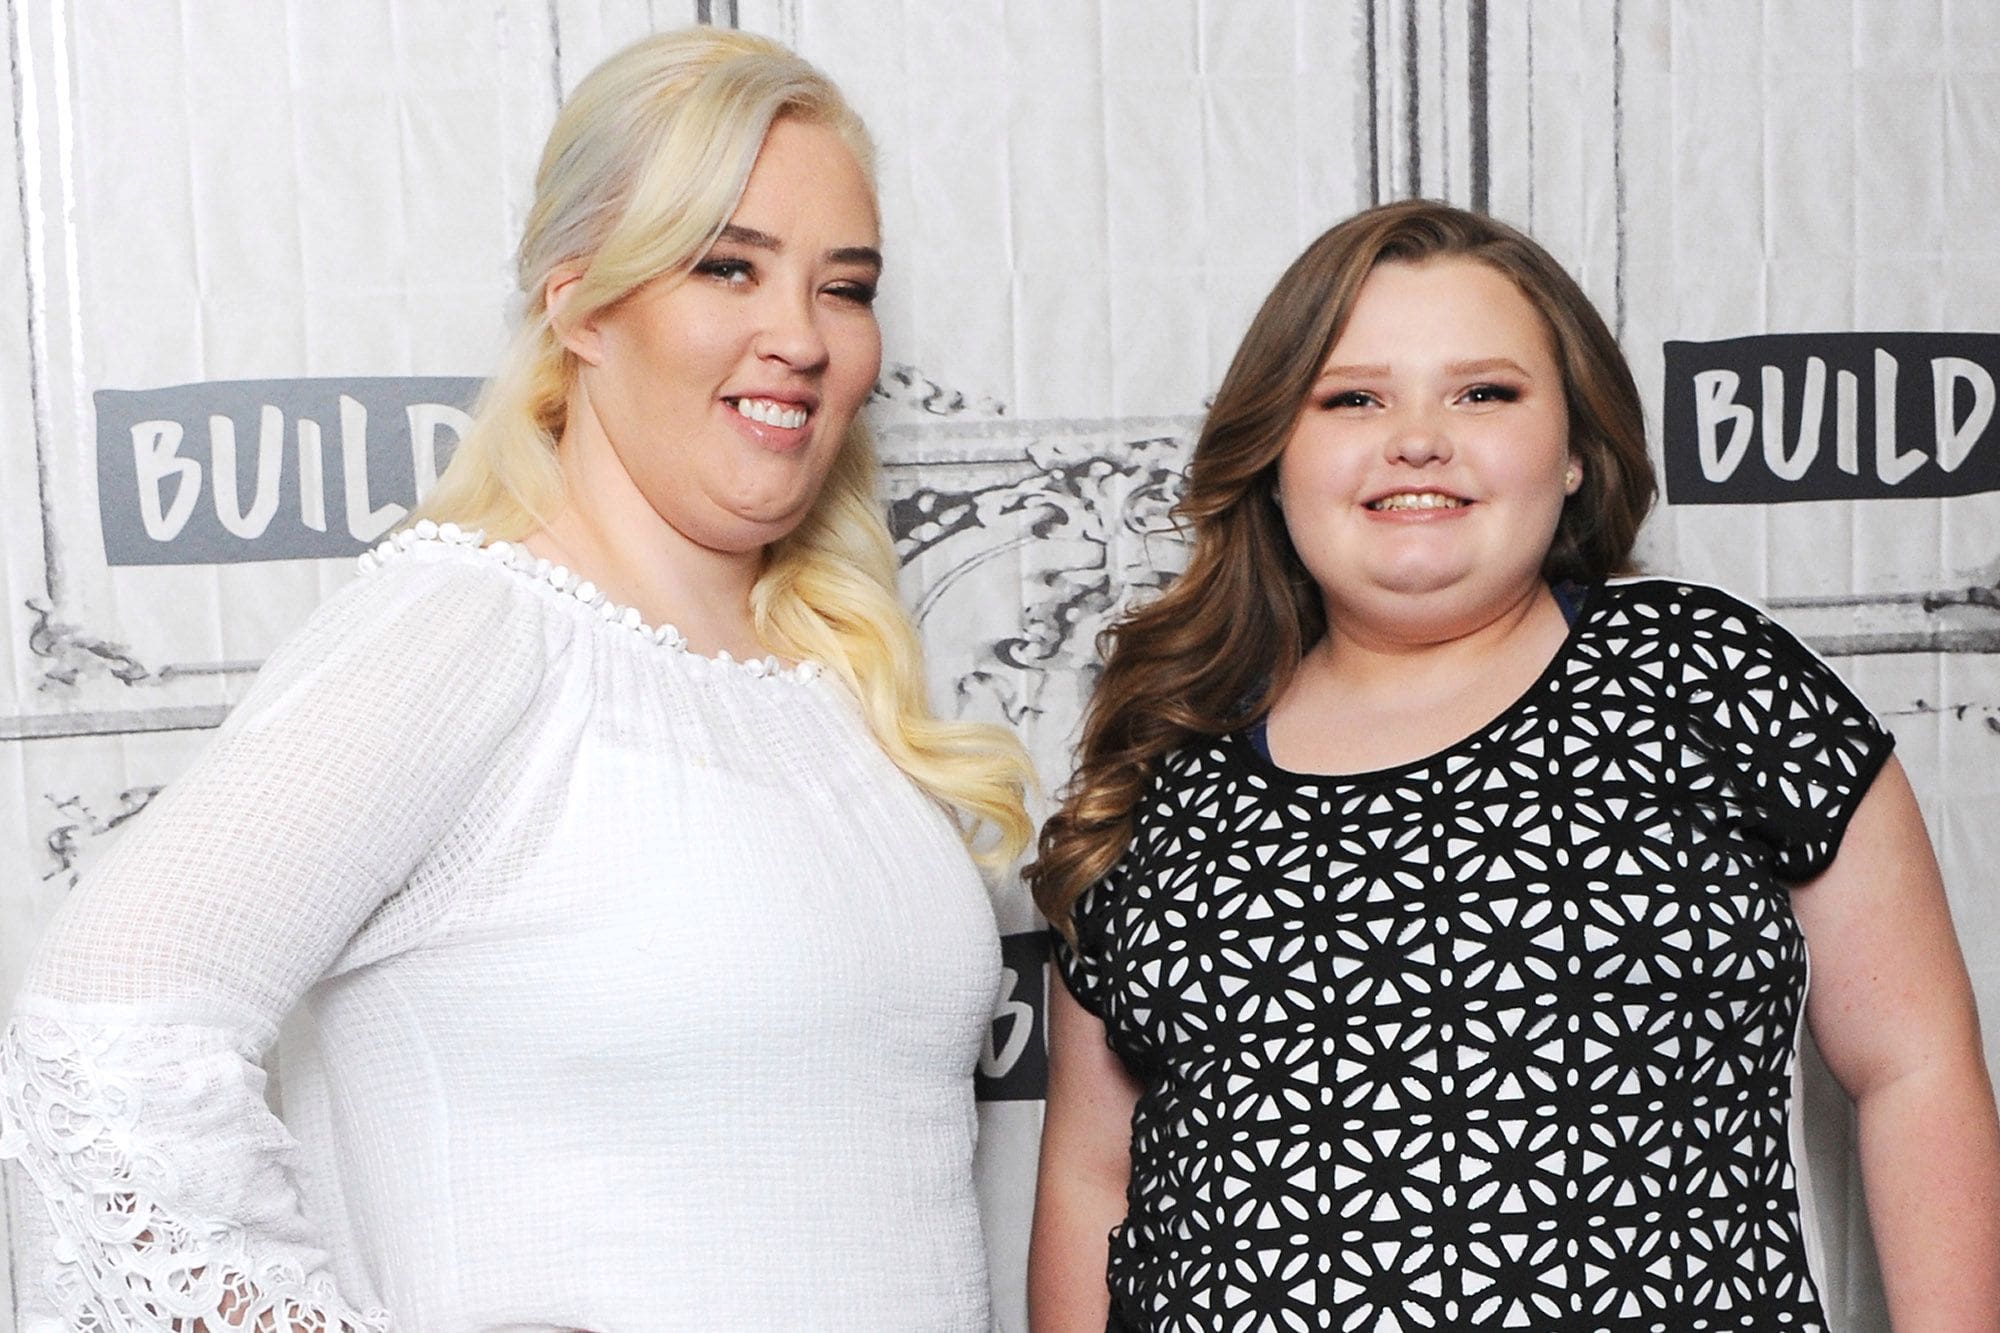 ”mama-june-denied-access-to-her-daughter-honey-boo-boos-bank-account-after-concerning-drug-arrest-and-gambling-problems”